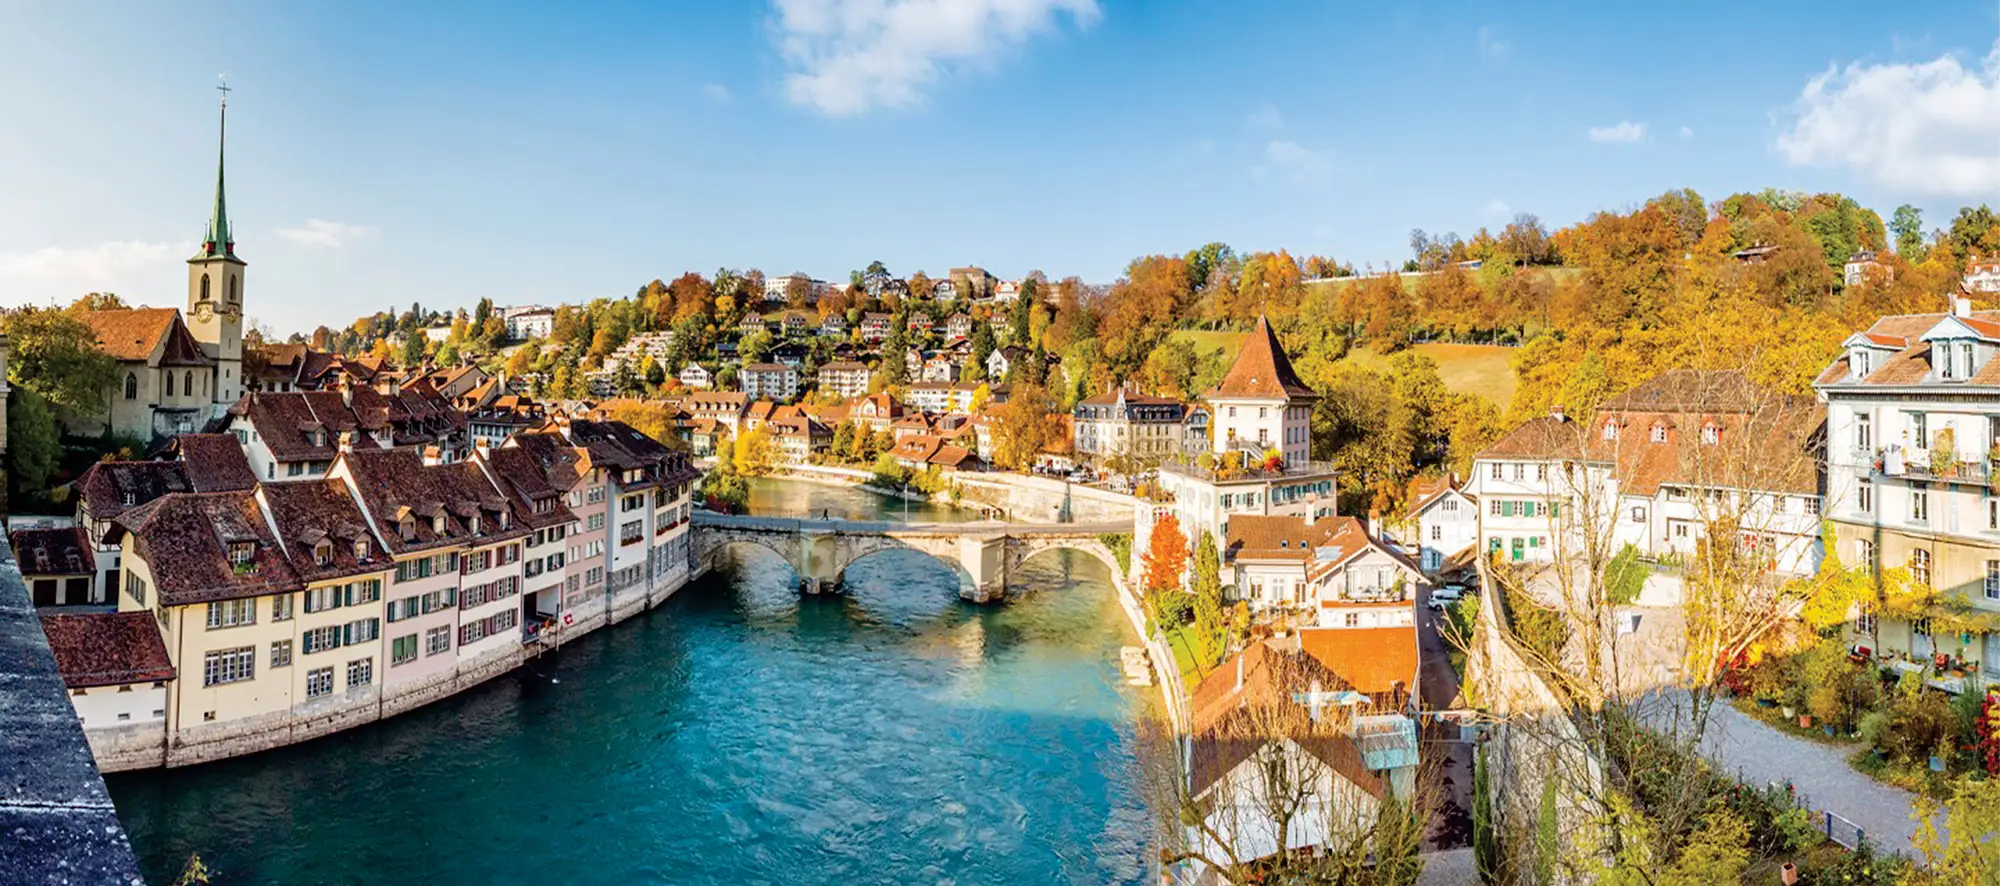 Panoramic view of canal in Switzerland with various types of houses lining the sides